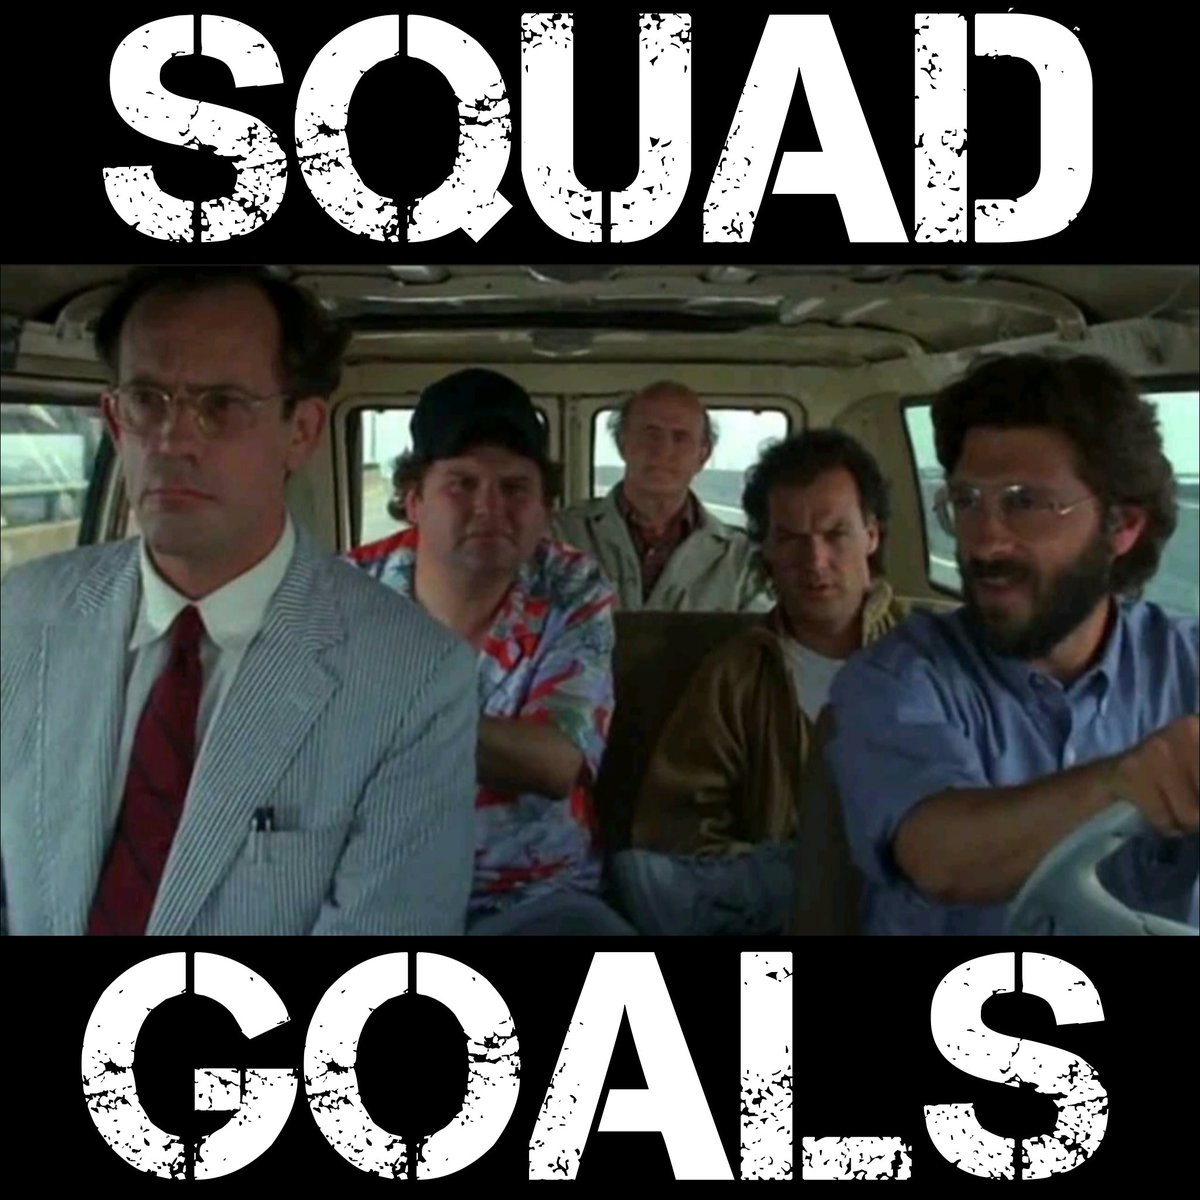 If you haven't downloaded our final #MarchMadness episode about #TheDreamTeam, what are you waiting for? Available now anywhere Pods are cast!

#MichaelKeaton #ChristopherLloyd #StephenFurst #PeterBoyle #DennisBoutsikaris #LorraineBracco #JamesRemar #PhilipBosco #MiloOShea